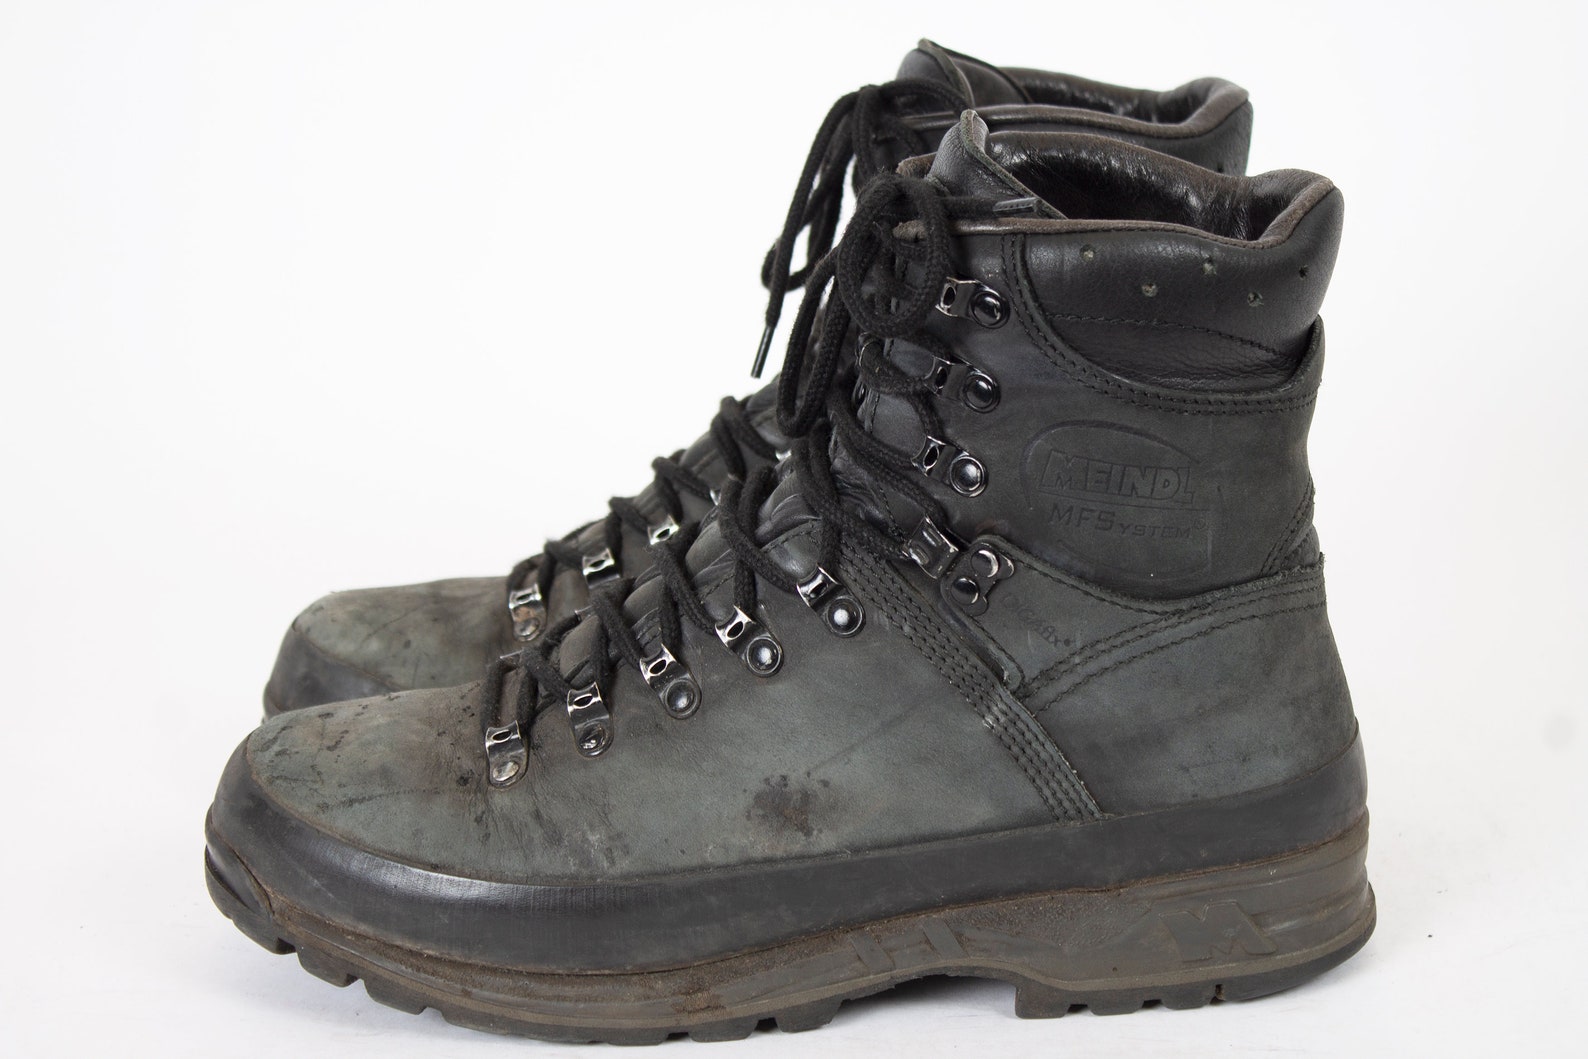 US9.5 Black Army Meindl Military-grade M1 Army Issued Boots - Etsy